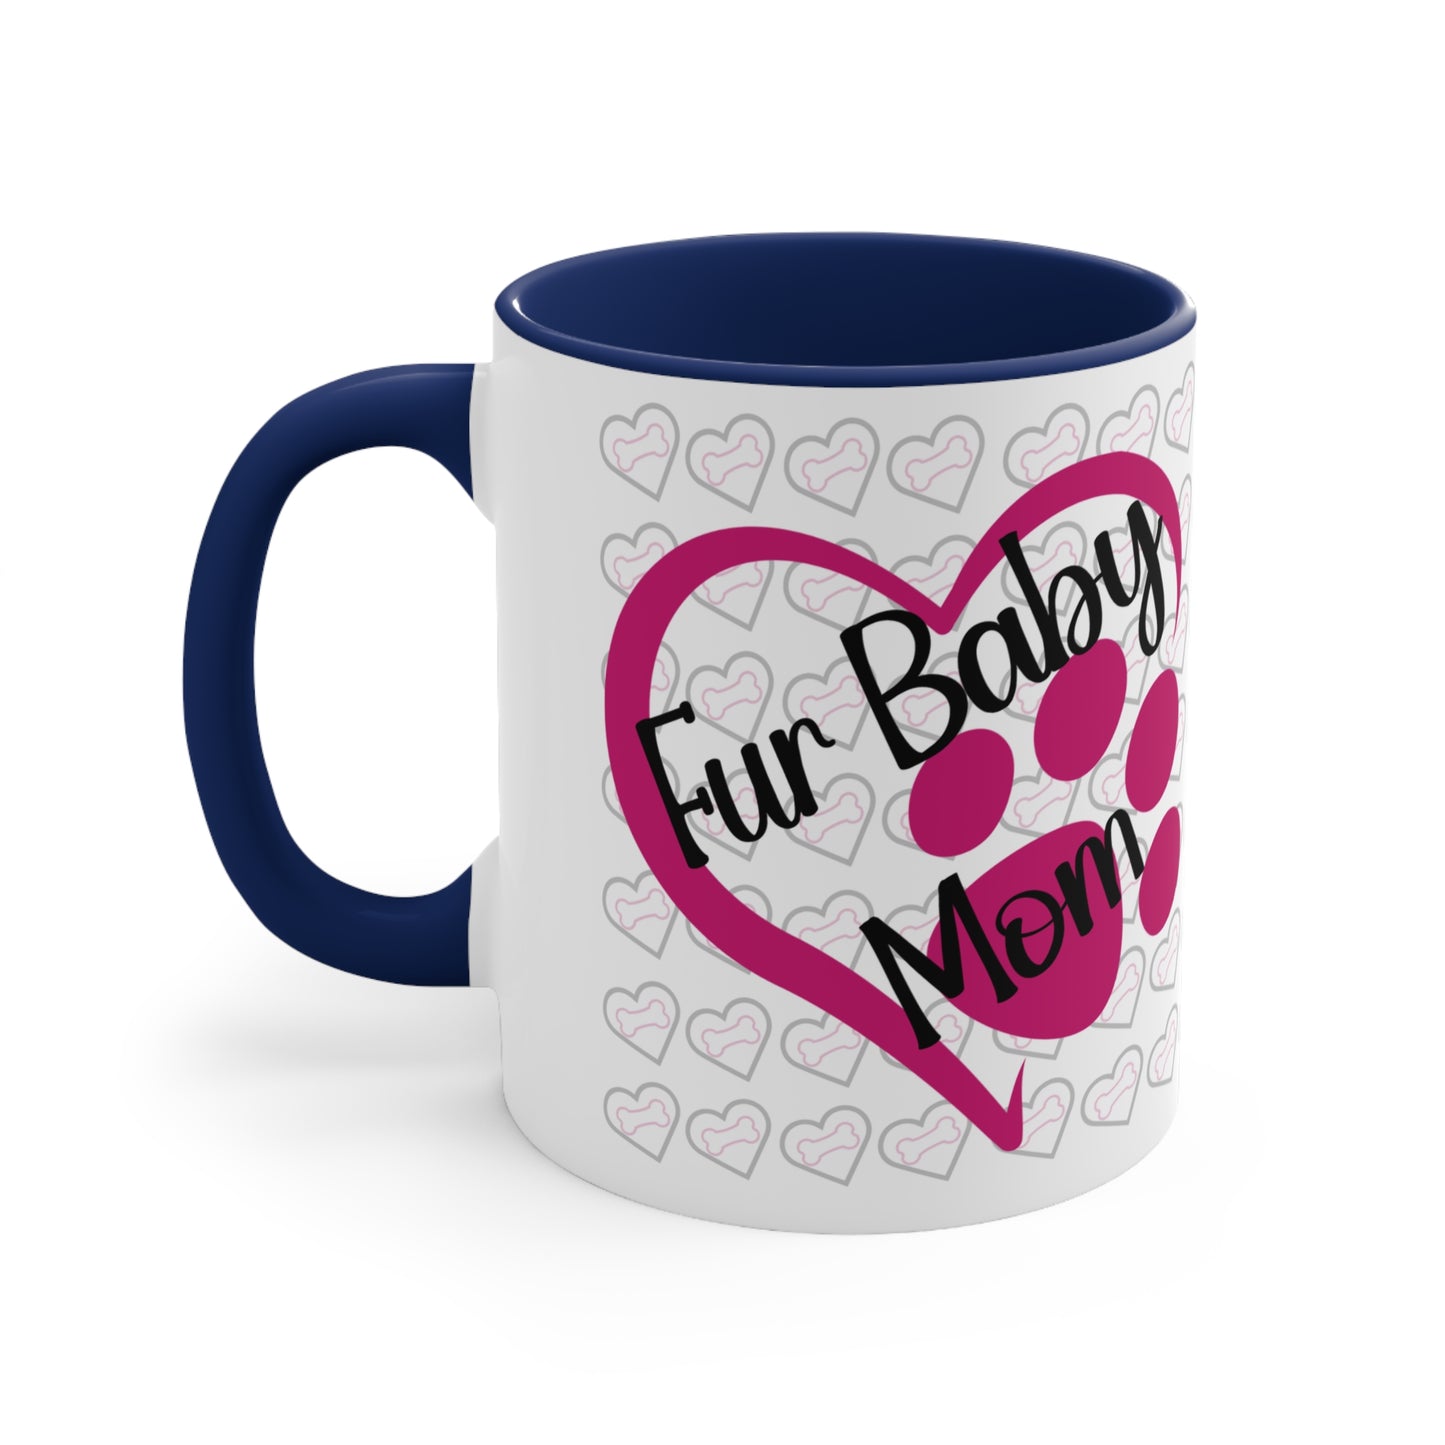 Fur baby mom coffee mug with pink heart and paw print 11 oz, back view in dark blue.